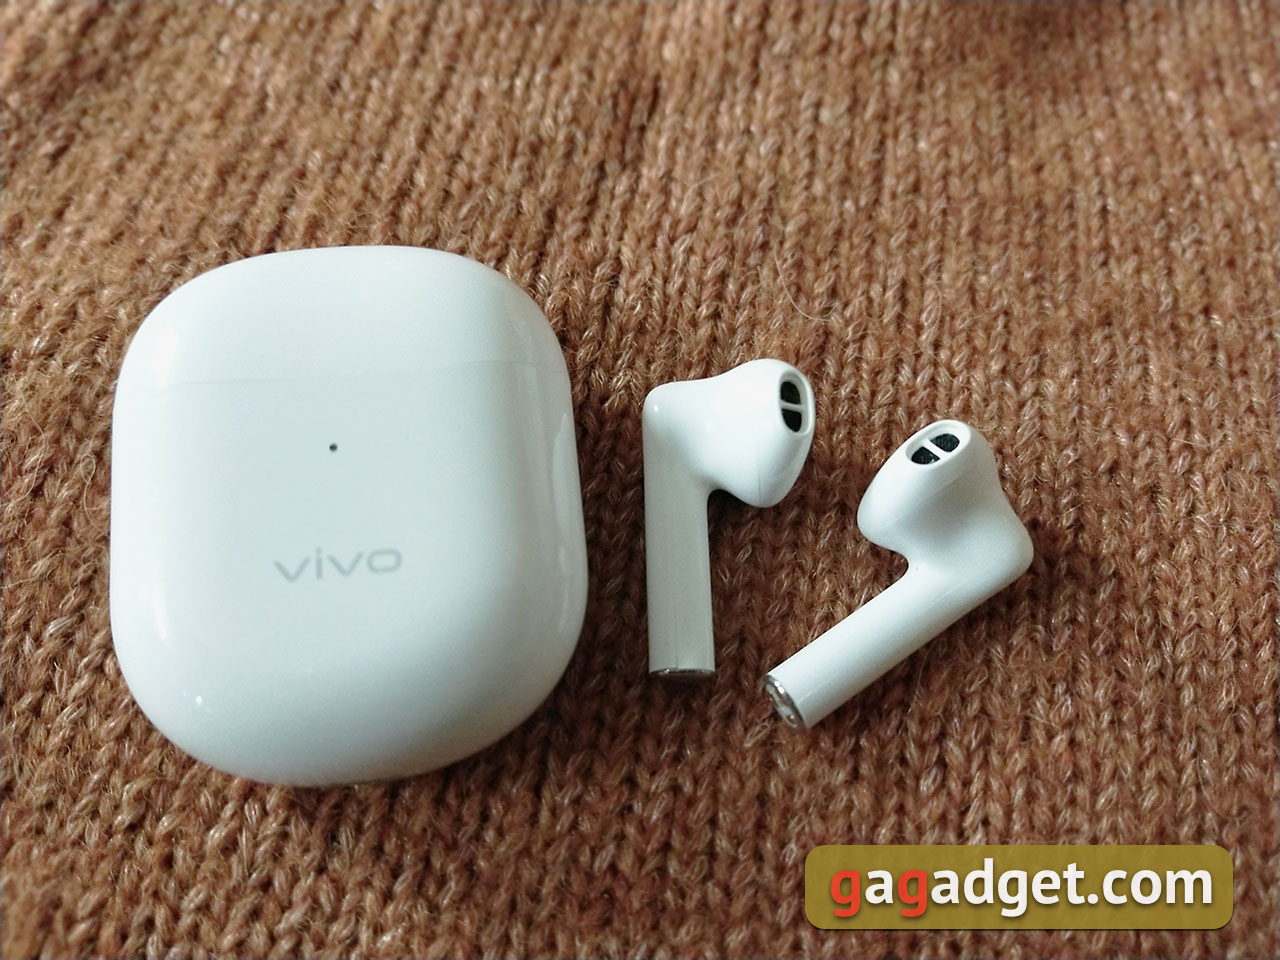 Vivo TWS 1 look: true wireless earbuds powered by Qualcomm QCC5126-2 flagship processor